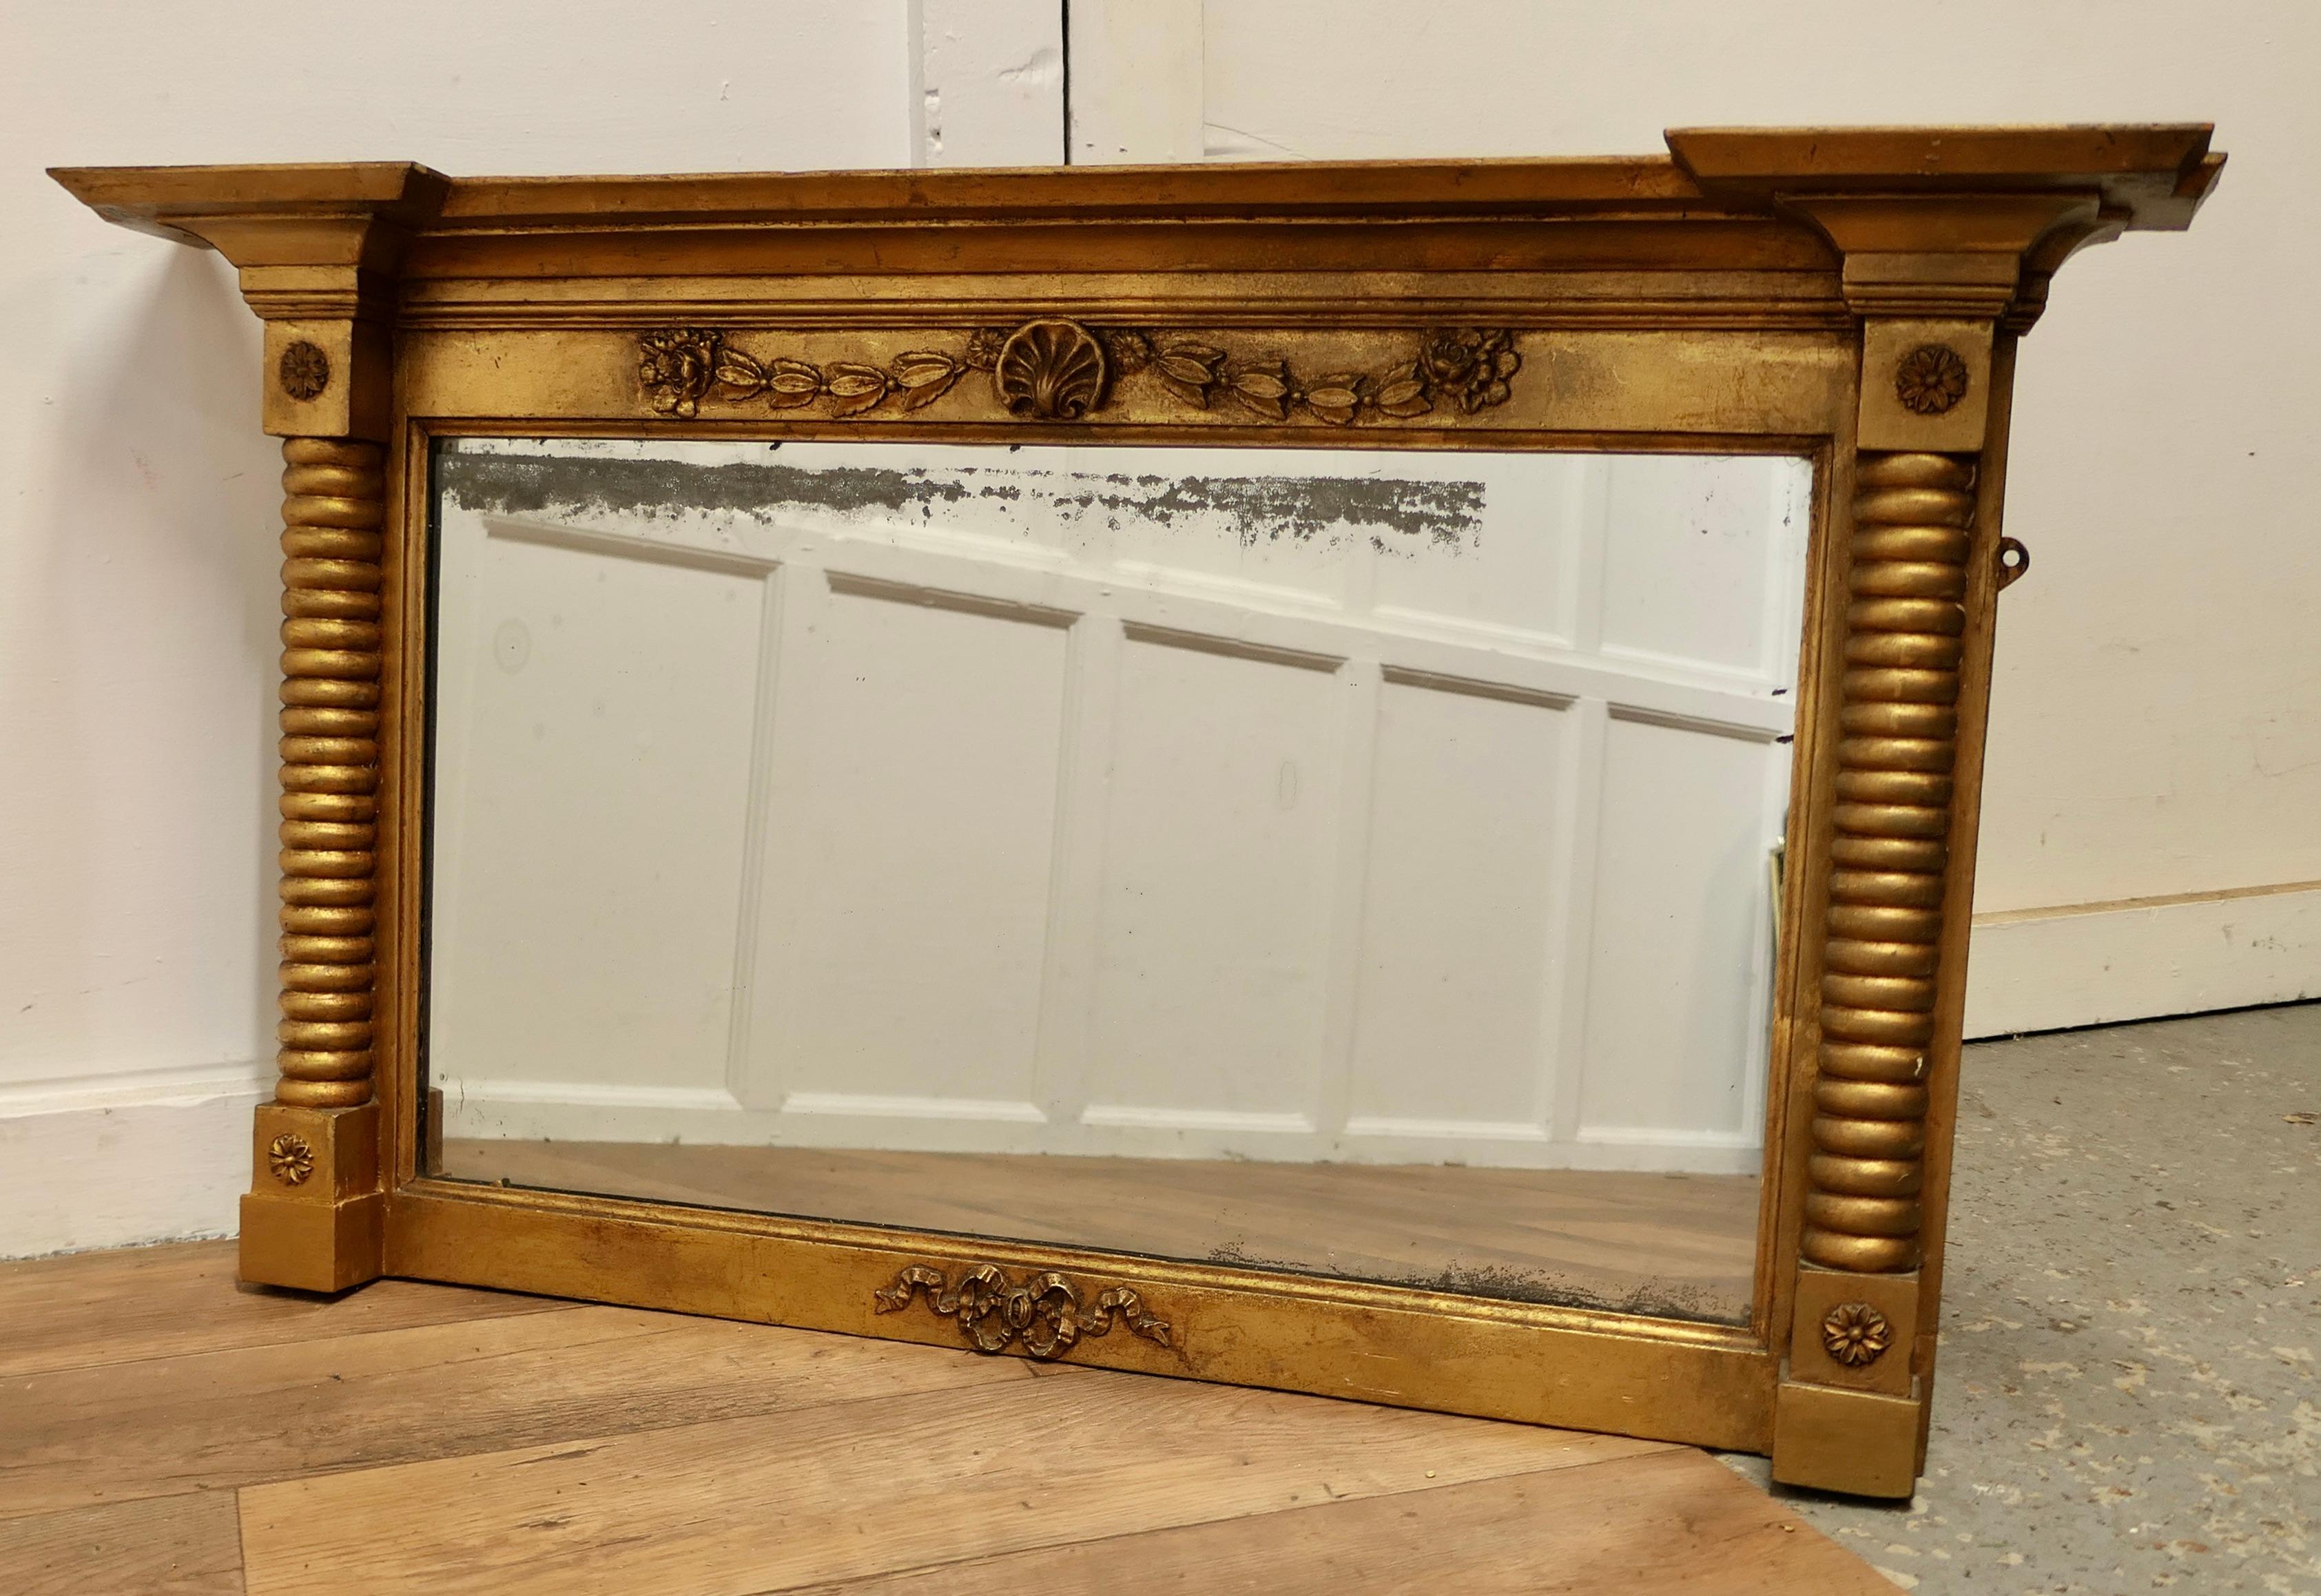 Regency Style Gilt Mirror or Over Mantle 

The Regency style carved Frame is a rectangular shape, it has twisted columns at either side and a shell and leaf design along the top.
The mirror has an old mercury rectangular glass, the glass is original